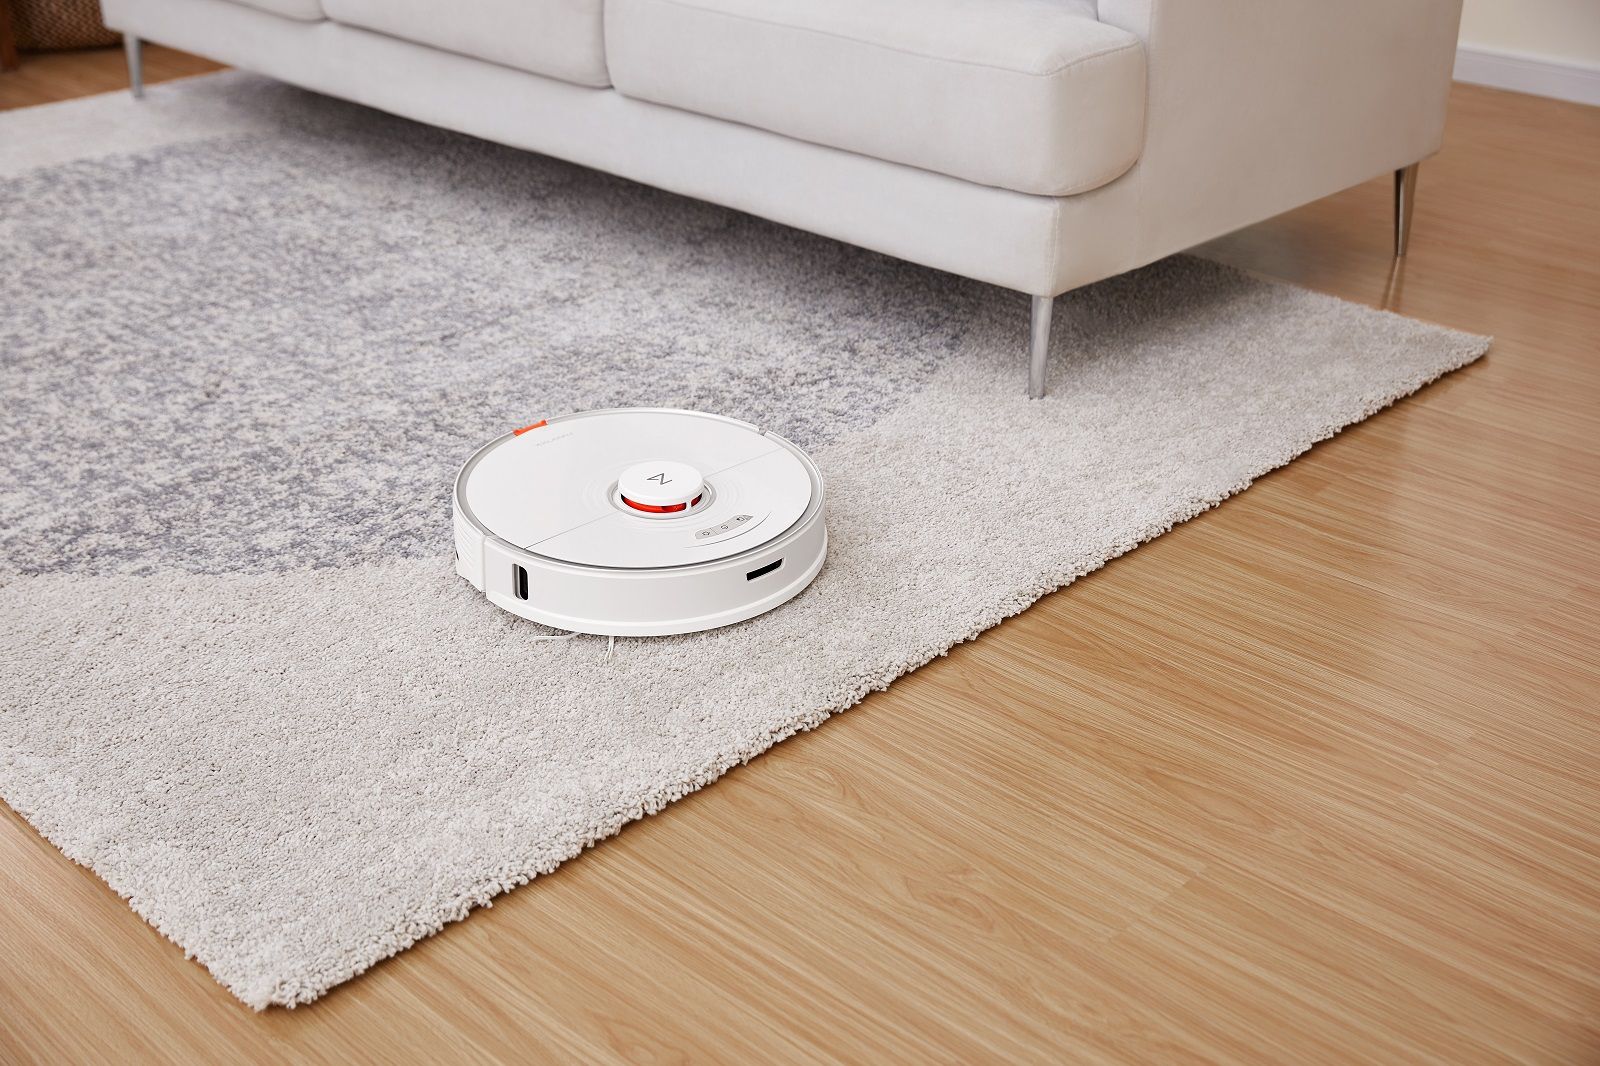 Roborock is making it easier to automatically vacuum and mop your home photo 1